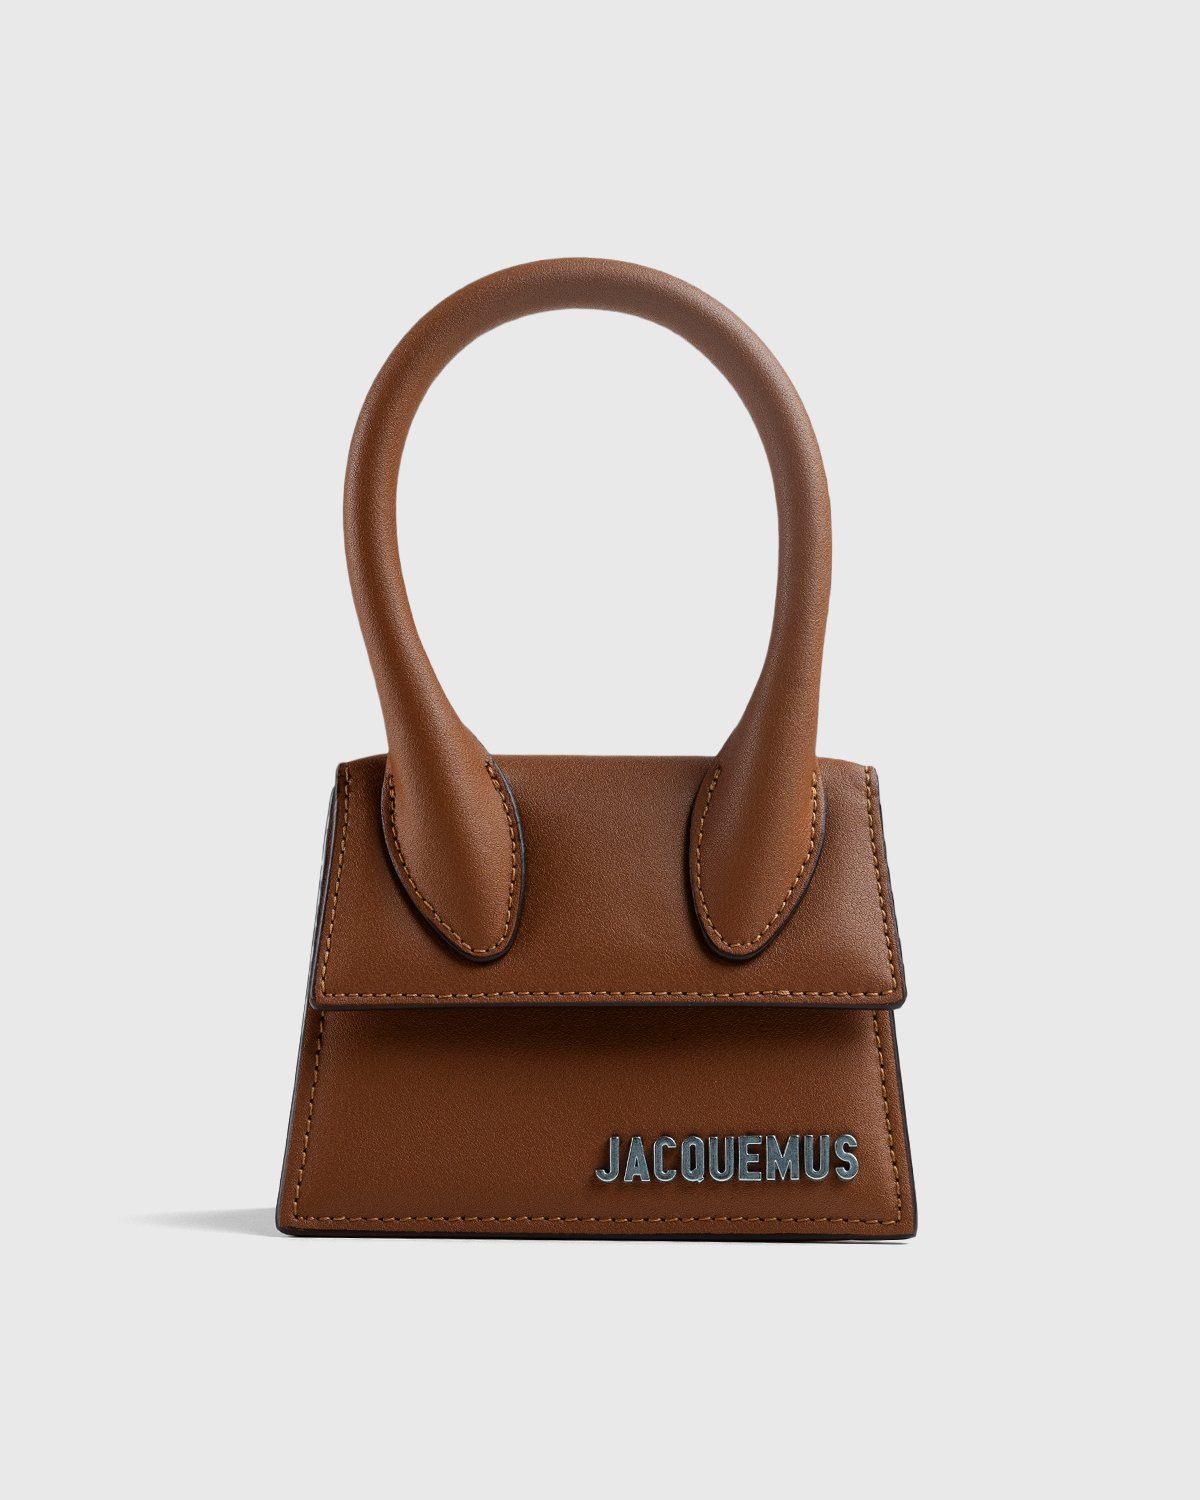 Jacquemus' Le Chiquito Bag Costs Almost $500 & It Can Barely Hold